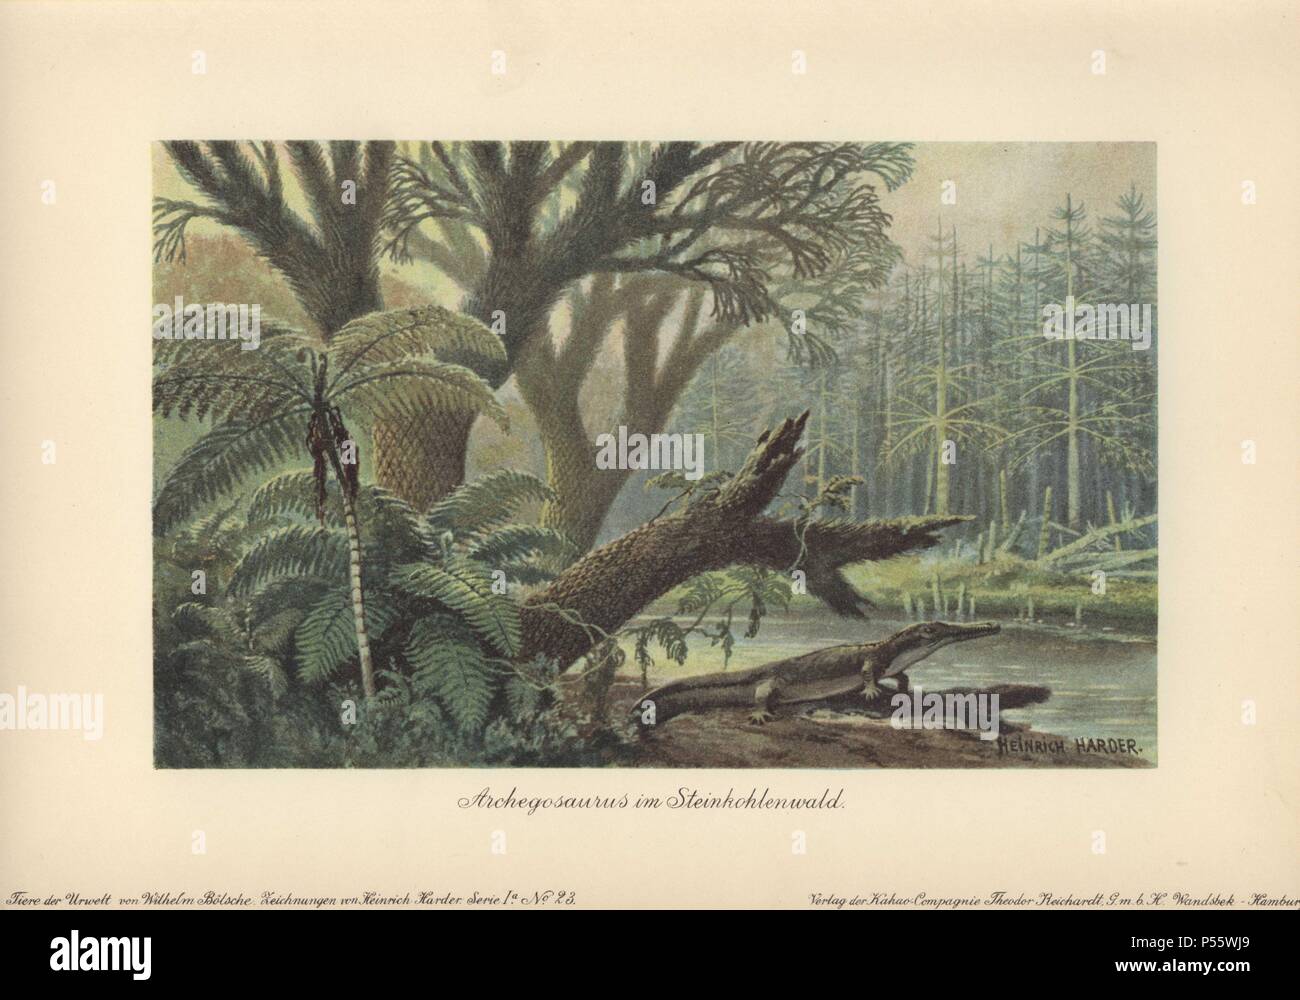 An archegosaurus by a river bank in a tropical primordial jungle of ferns and pines. . . Archegosaurus is a genus of amphibian which lived during the Asselian to Wuchiapingian ages of the Permian era. Extinct. . . Colour printed illustration by Heinrich Harder from 'Tiere der Urwelt' Animals of the Prehistoric World, 1916, Hamburg. Heinrich Harder (1858-1935) was a German landscape artist and book illustrator. From a series of prehistoric creature cards published by the Reichardt Cocoa company. Natural historian Wilhelm Bolsche wrote the descriptive text. Stock Photo